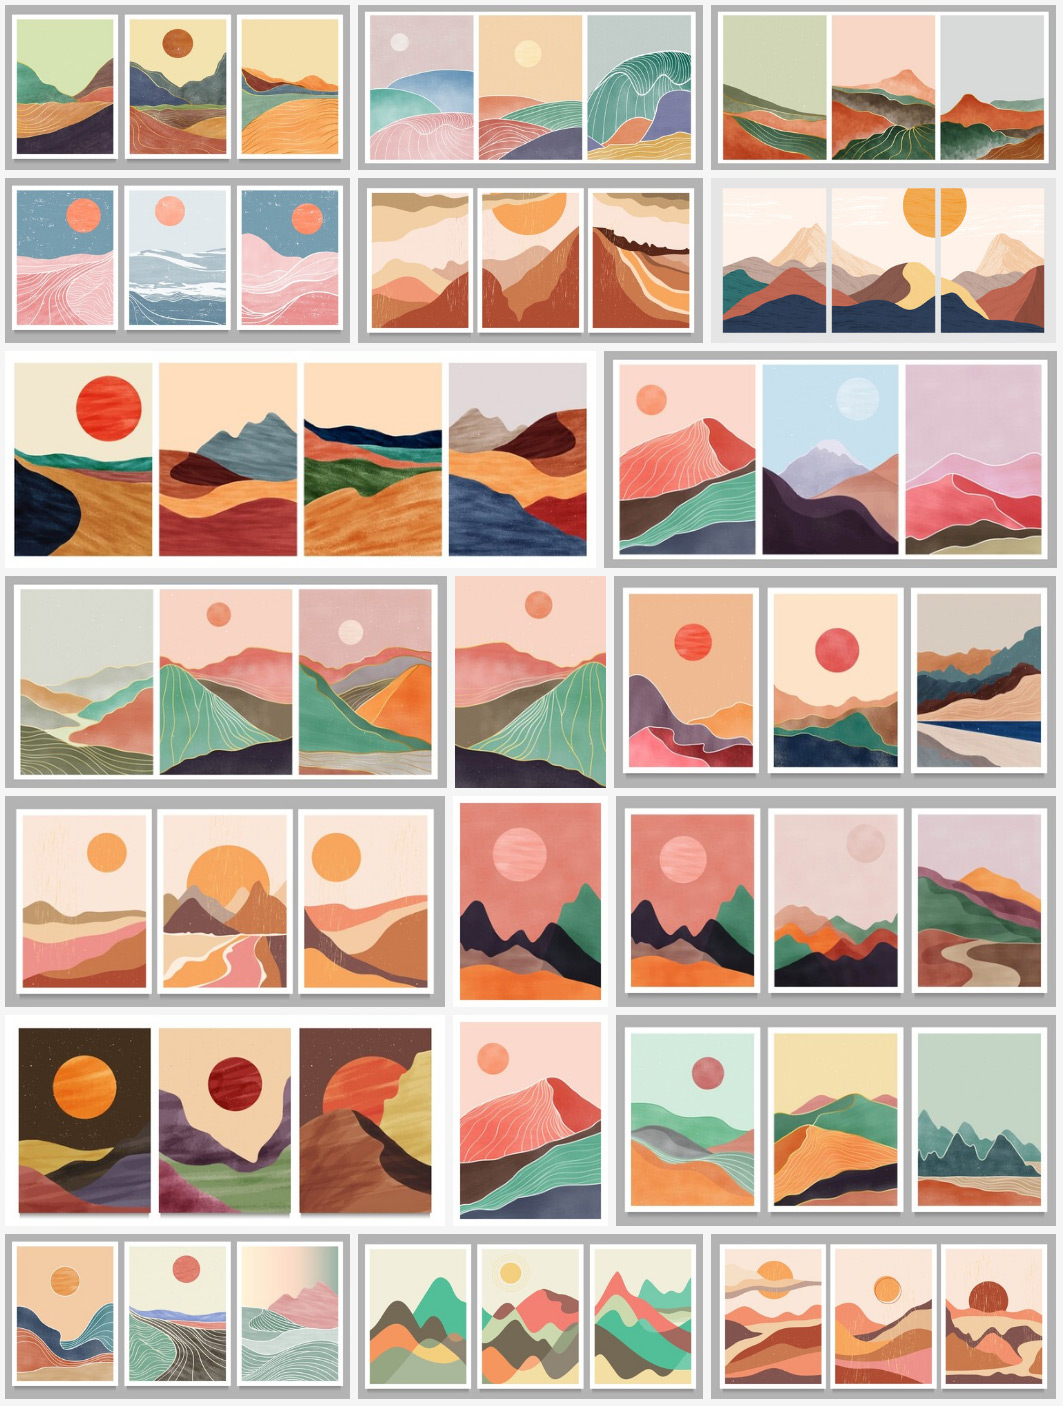 Download Artworks of Minimalist Landscapes as Vector Graphics